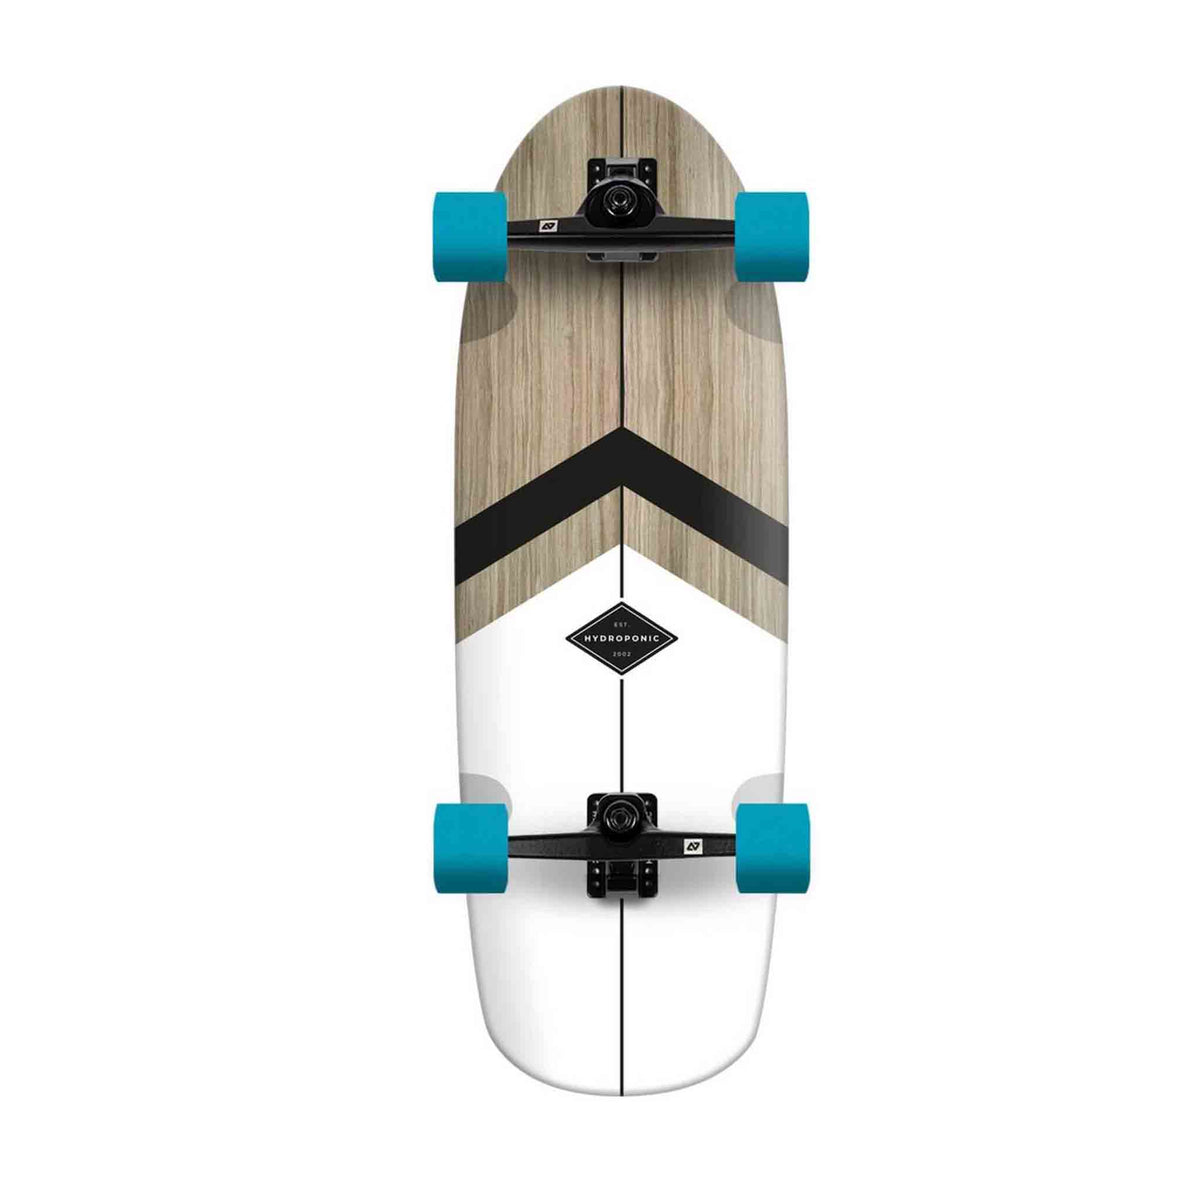 Hydroponic Rounded Complete Surfskate - JT Skateboard